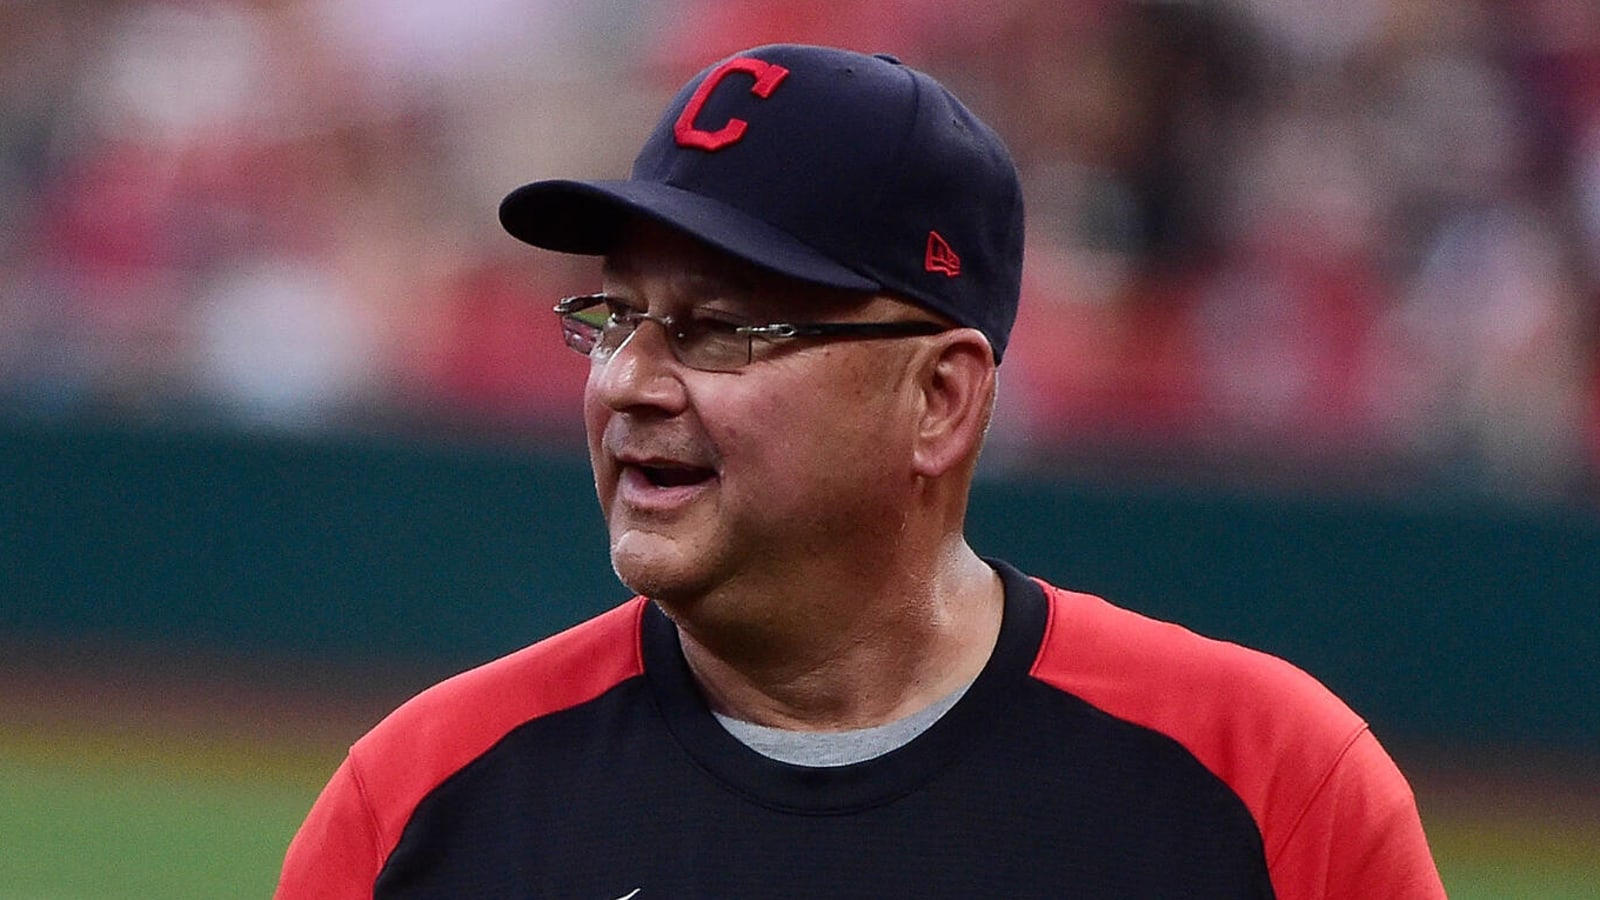 Terry Francona returns to Guardians after COVID absence